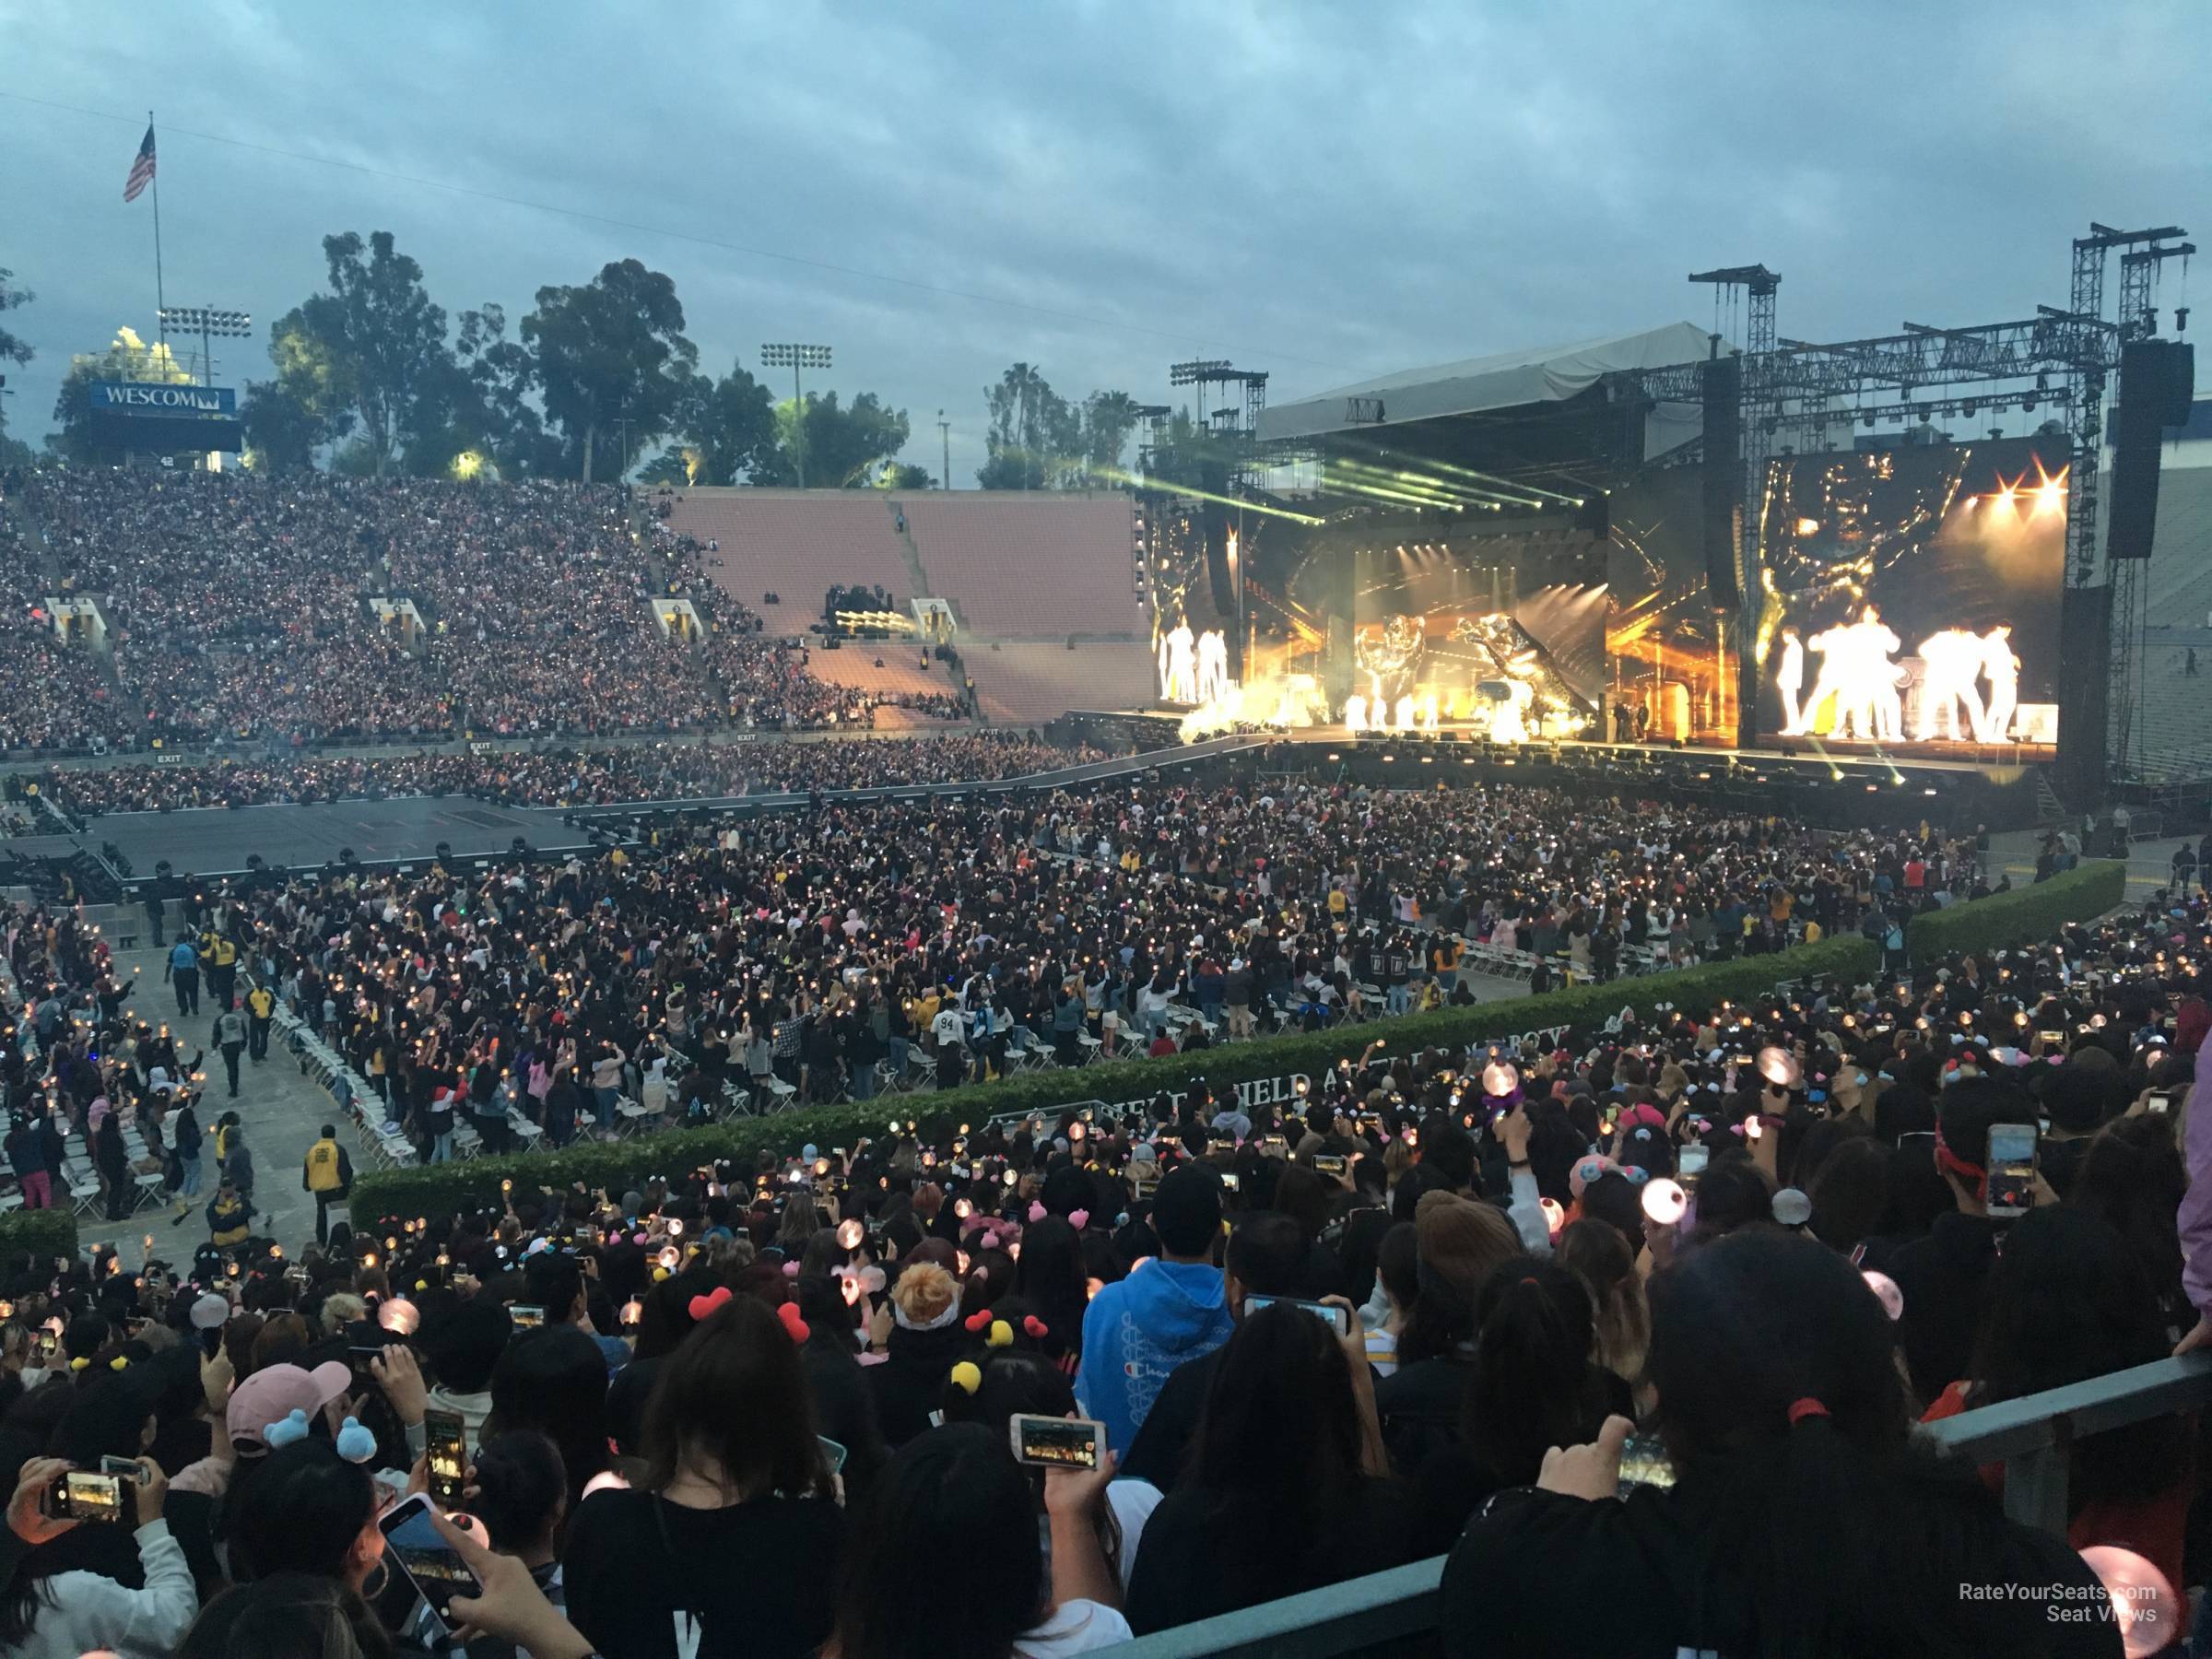 section 18, row 30 seat view  for concert - rose bowl stadium